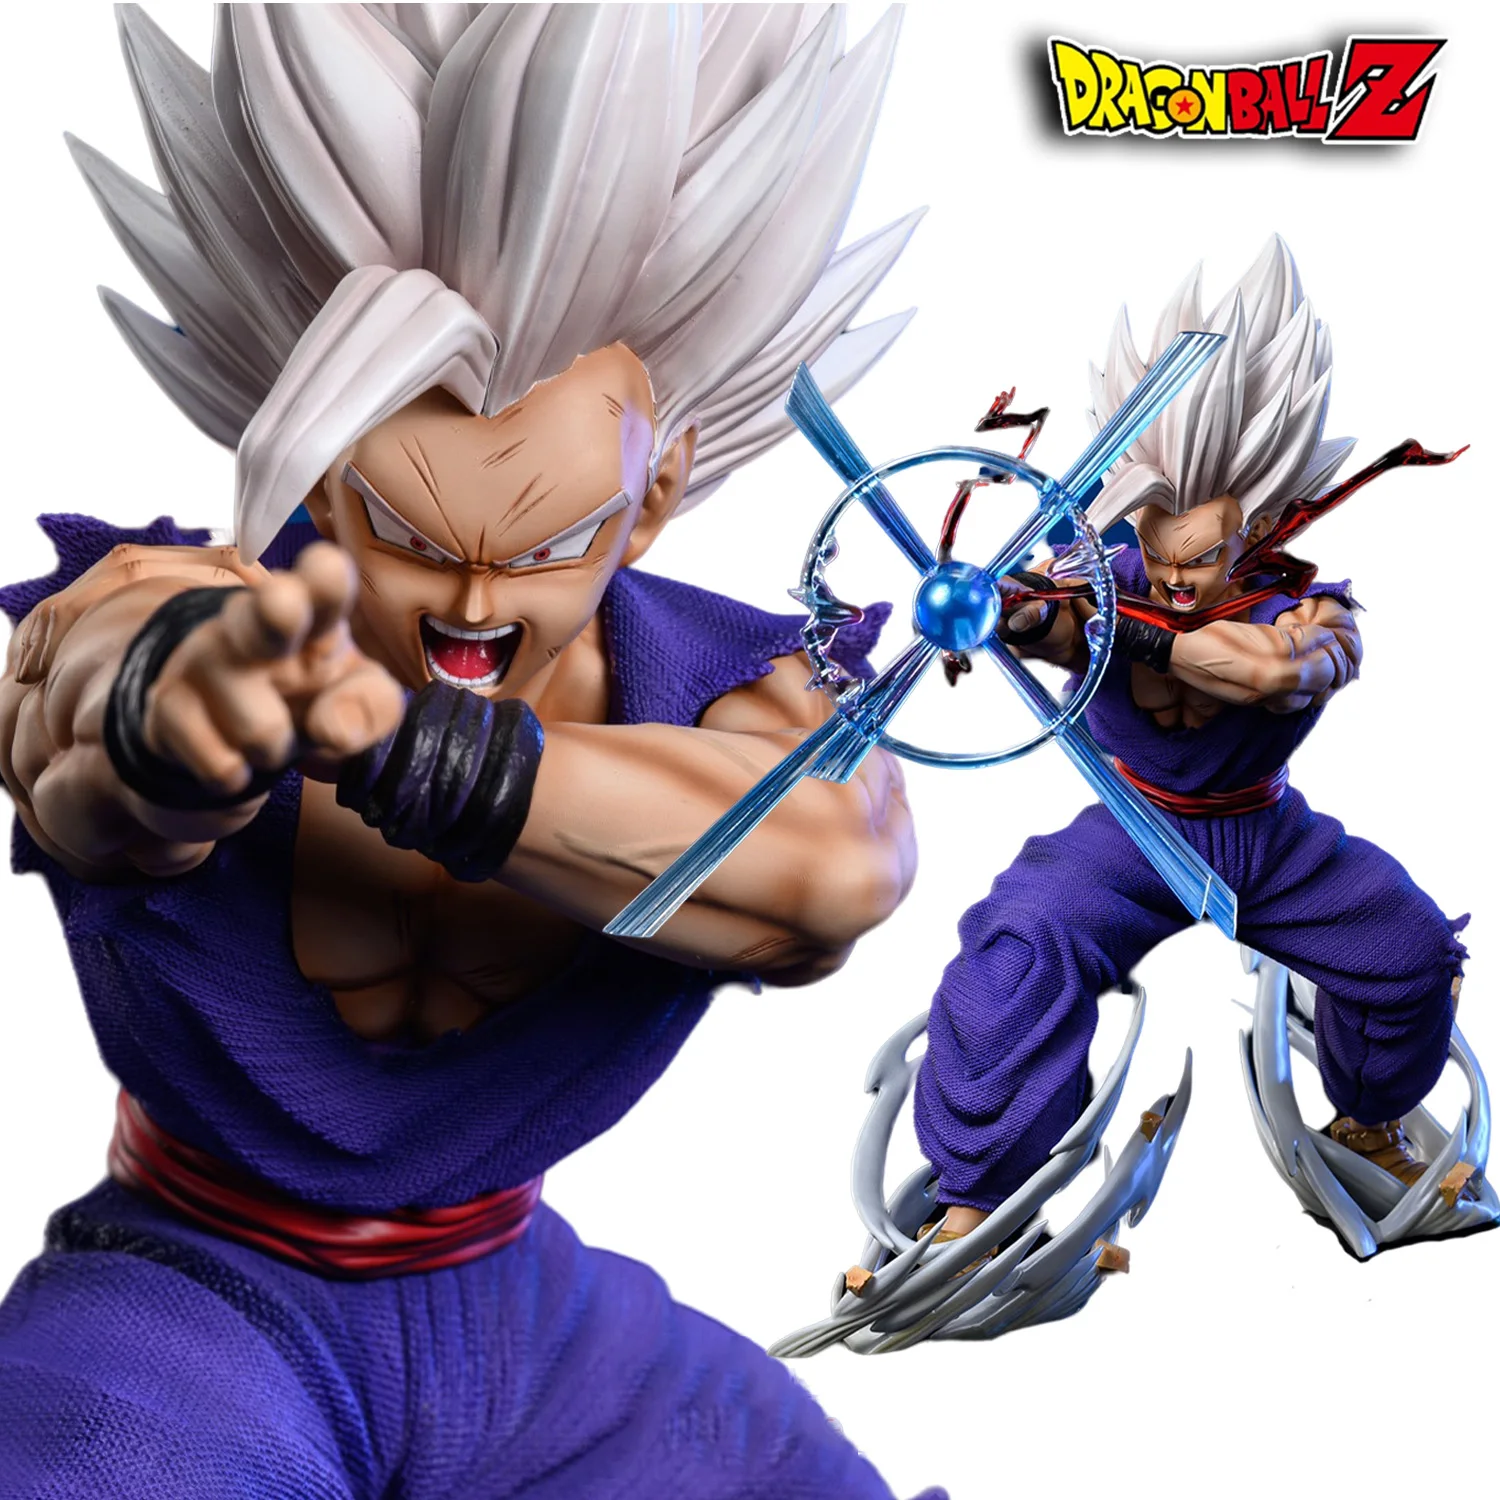 

25cm Dragon Ball Z Figure Son Gohan Anime Figures Ssj3 Action Figurine Makankosappo PVC Statue Model Doll Collectible Toys Gifts